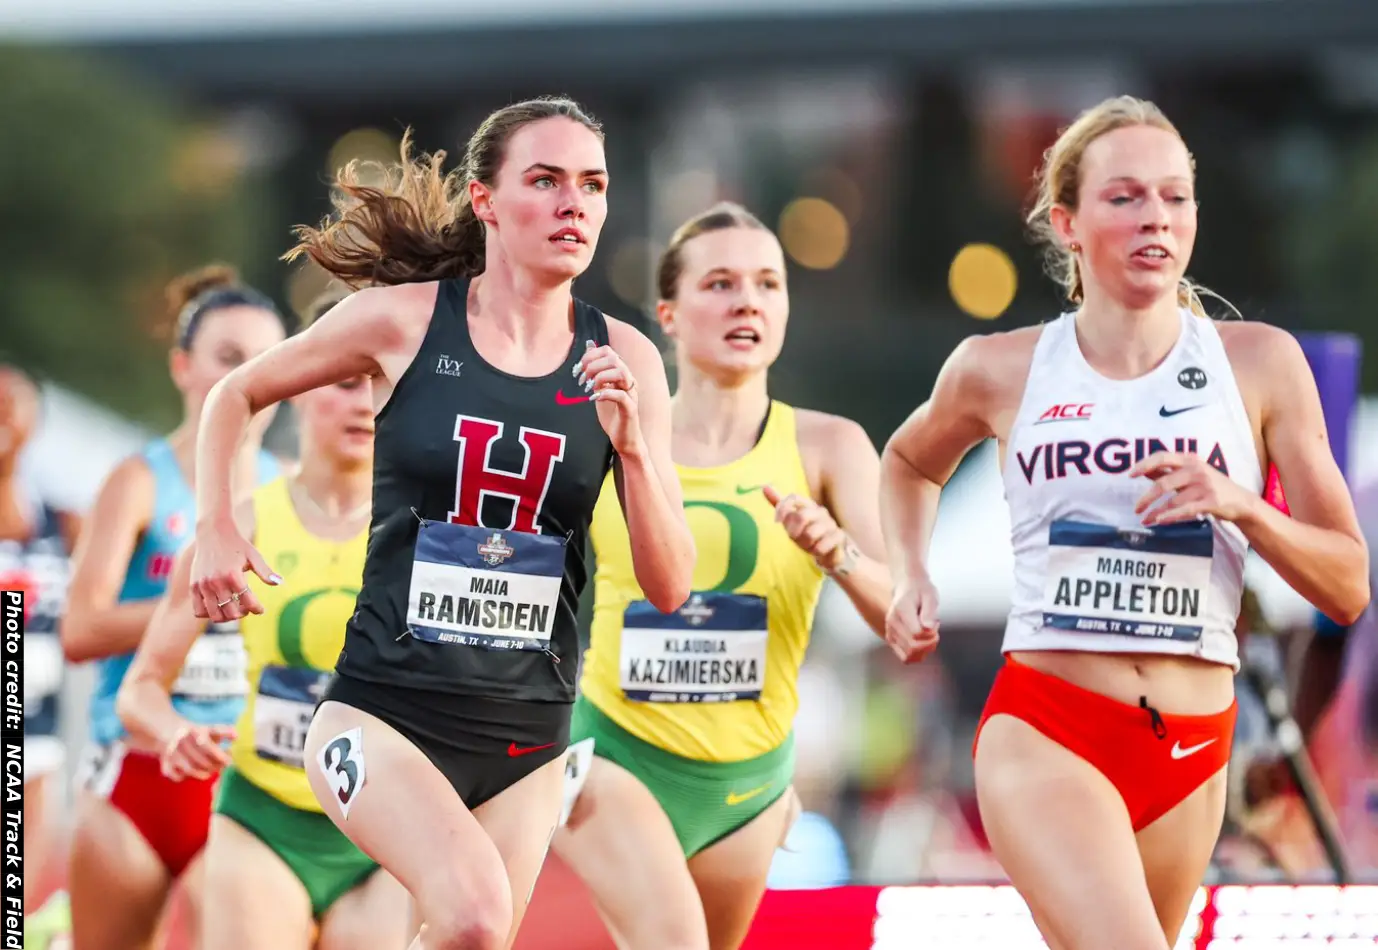 NCAA champion Maia Ramsden travels with Harvard for UK meets